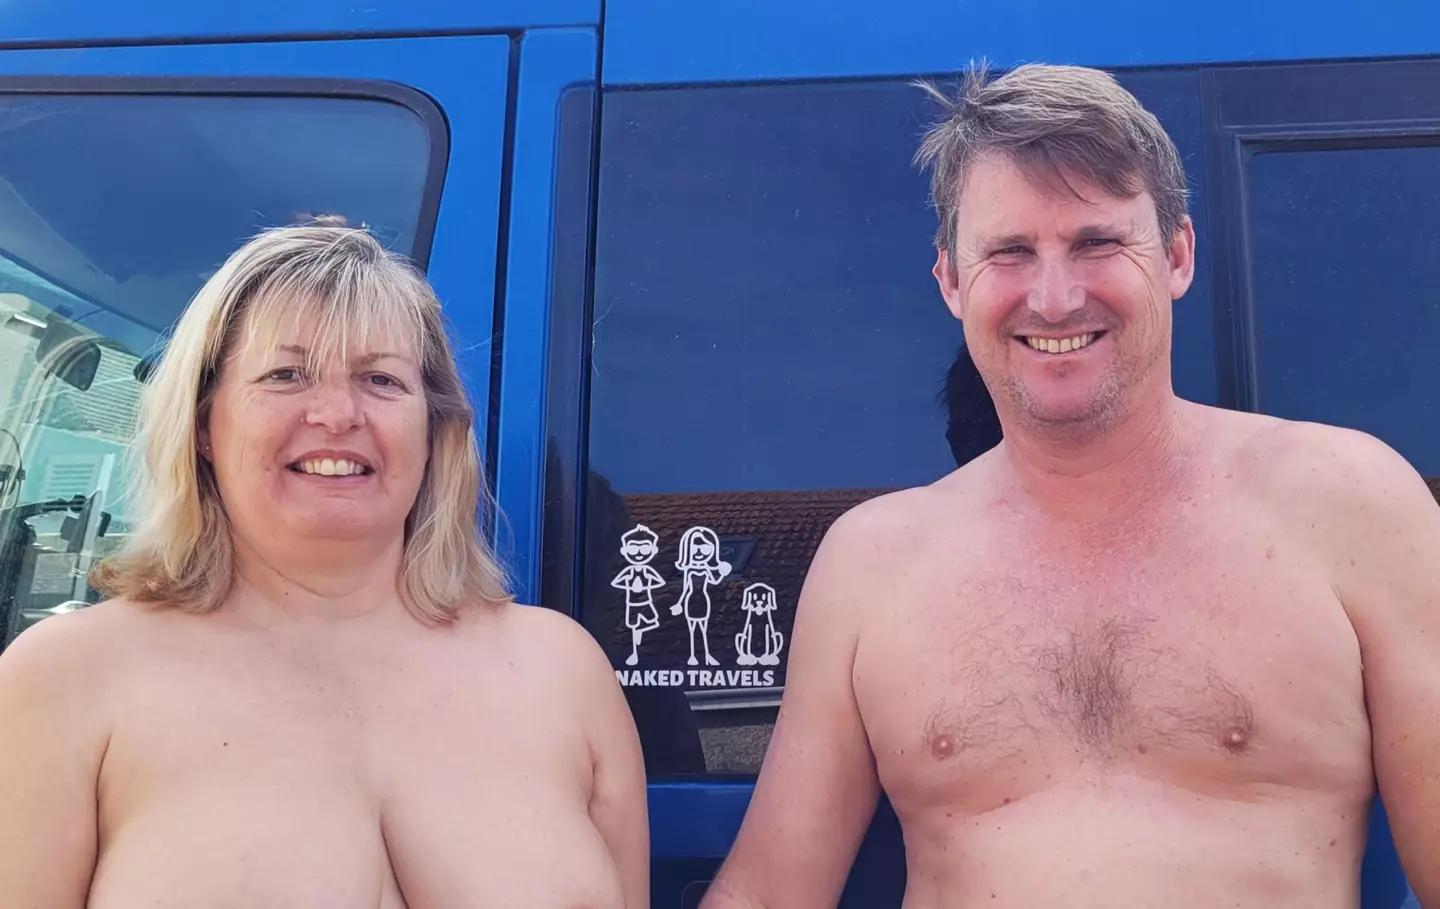 Fiona says naturism has helped boost her confidence.